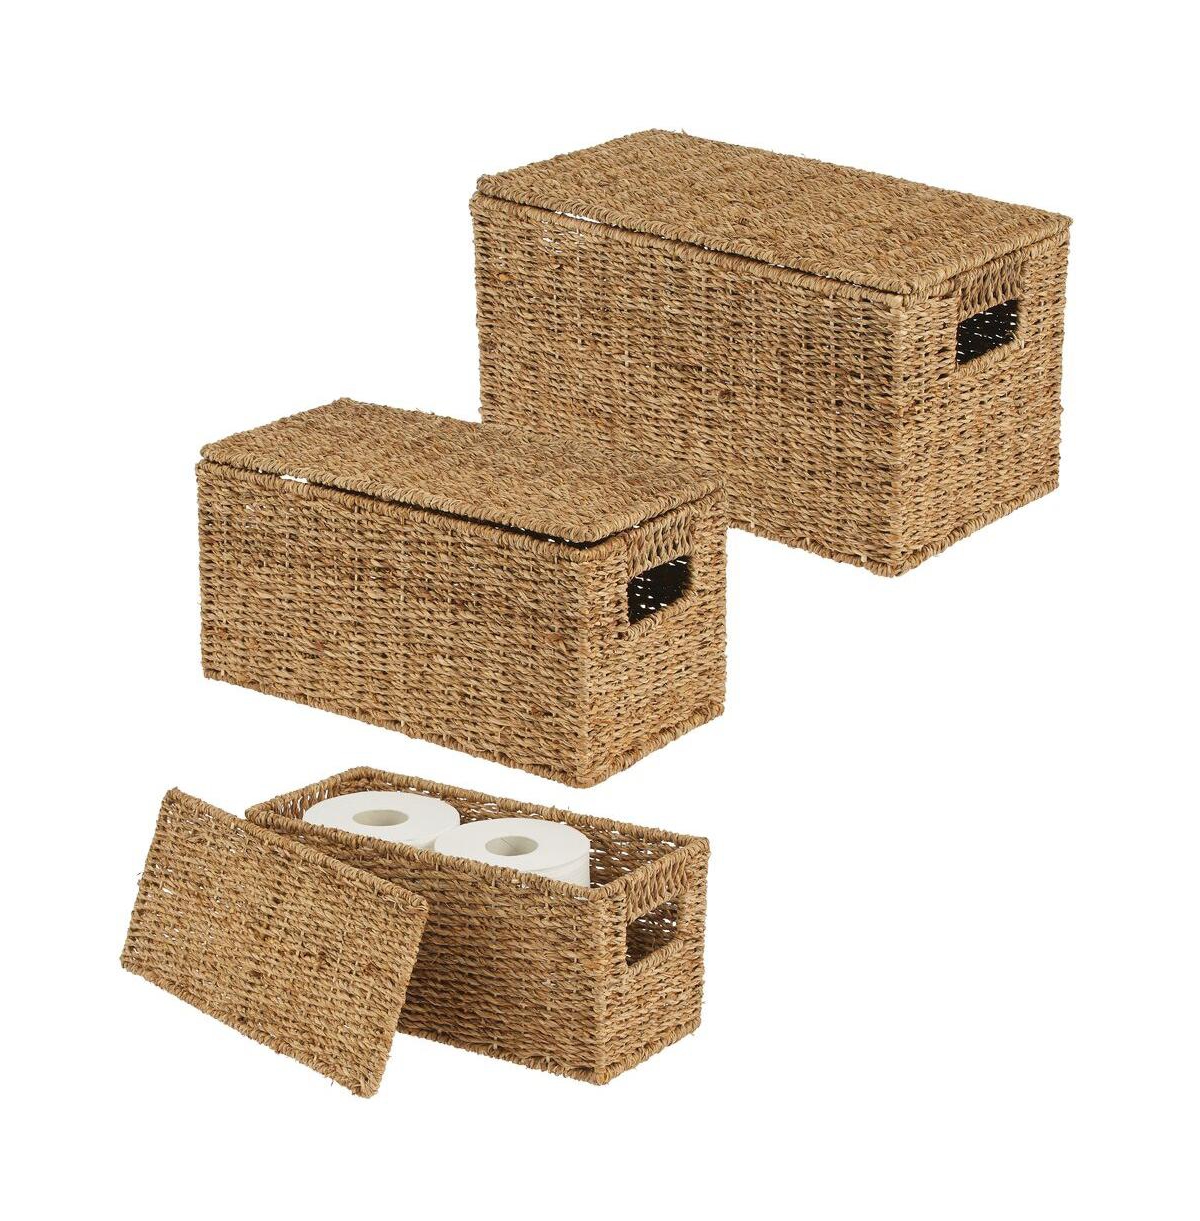 Woven Seagrass Home Storage Basket with Lid, Set of 3 - Natural